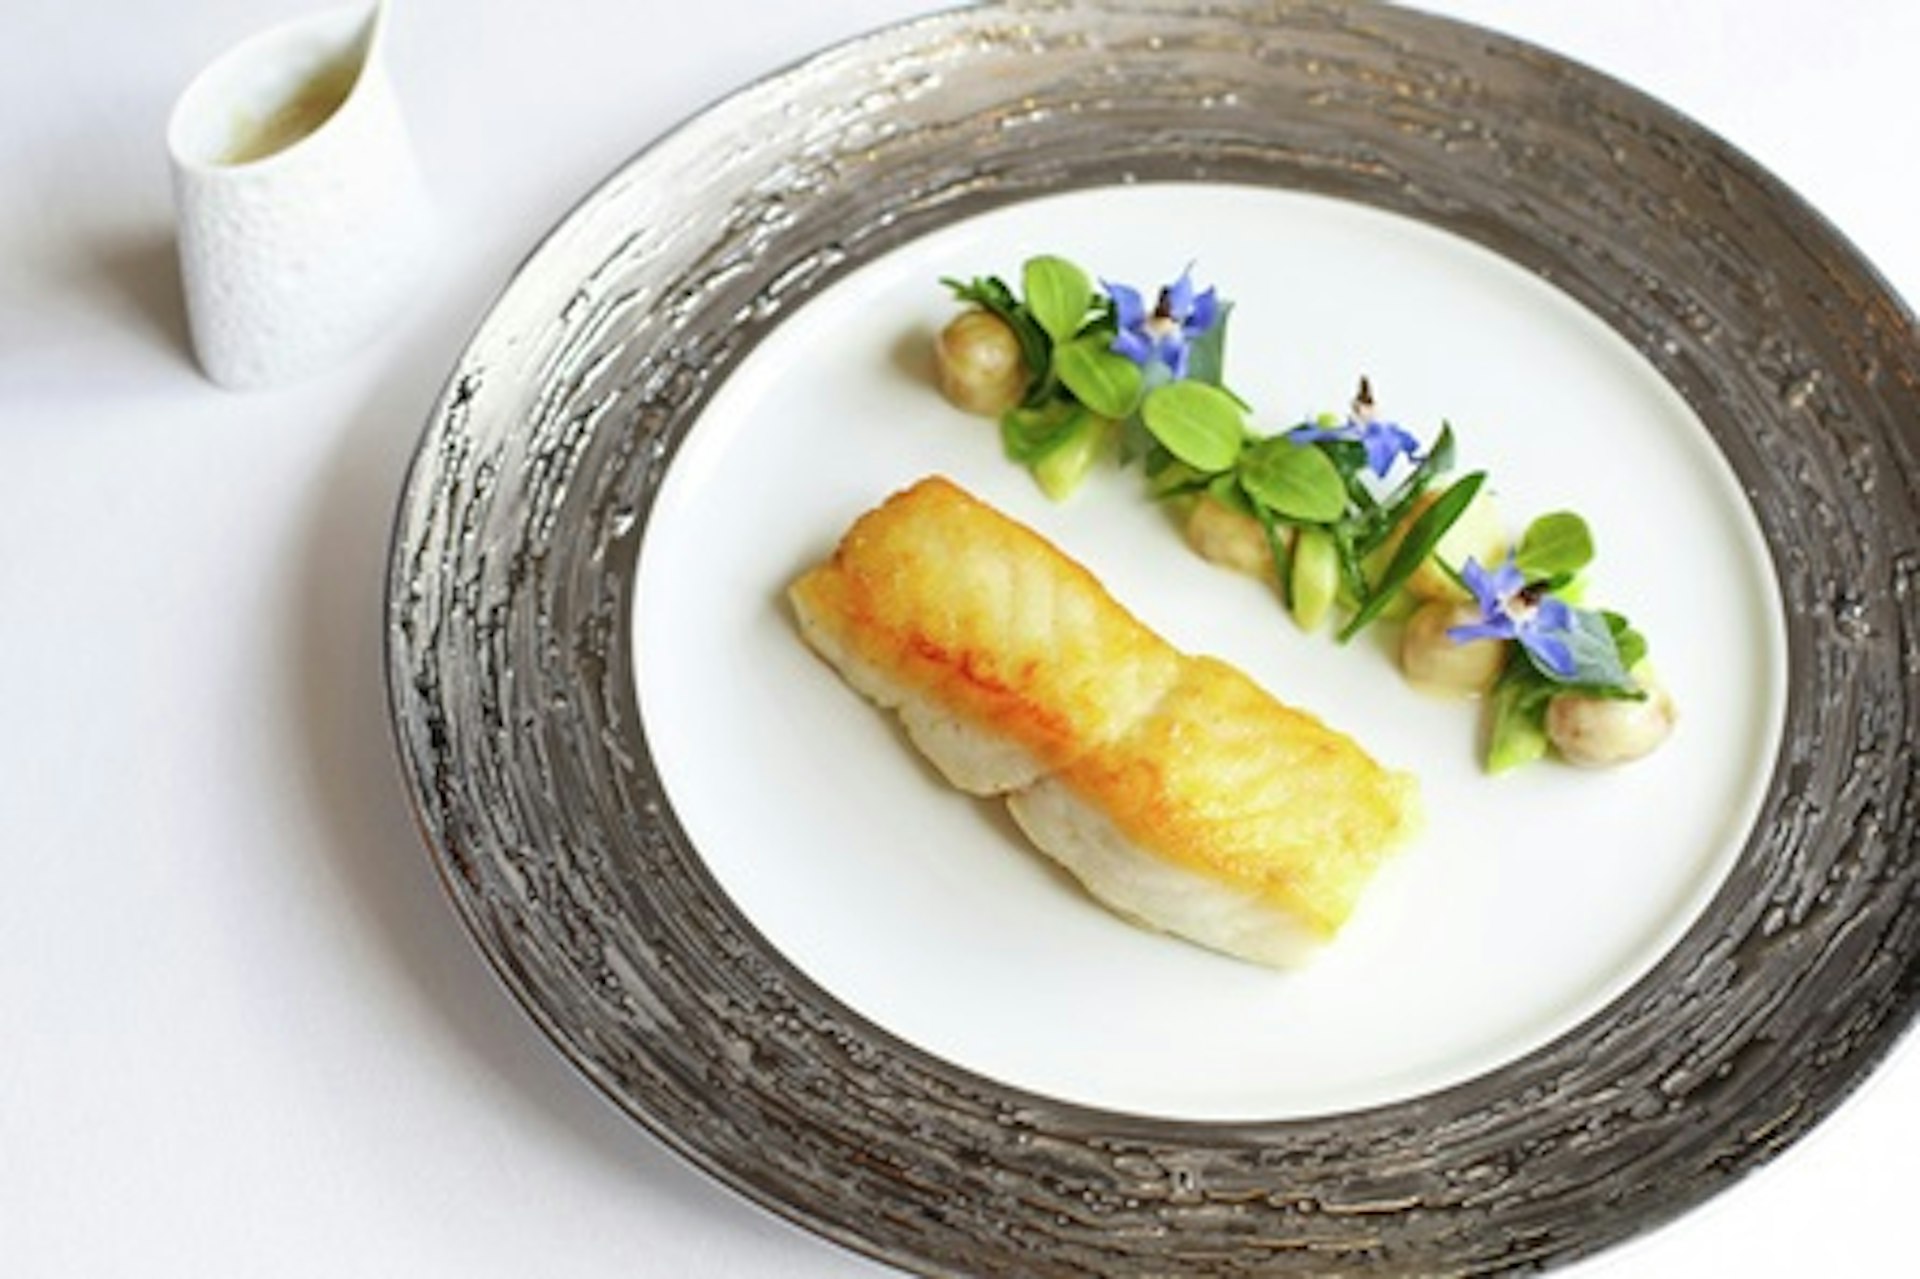 Three Course 'Taste of Pétrus' Experience for Two at Gordon Ramsay's Pétrus 1